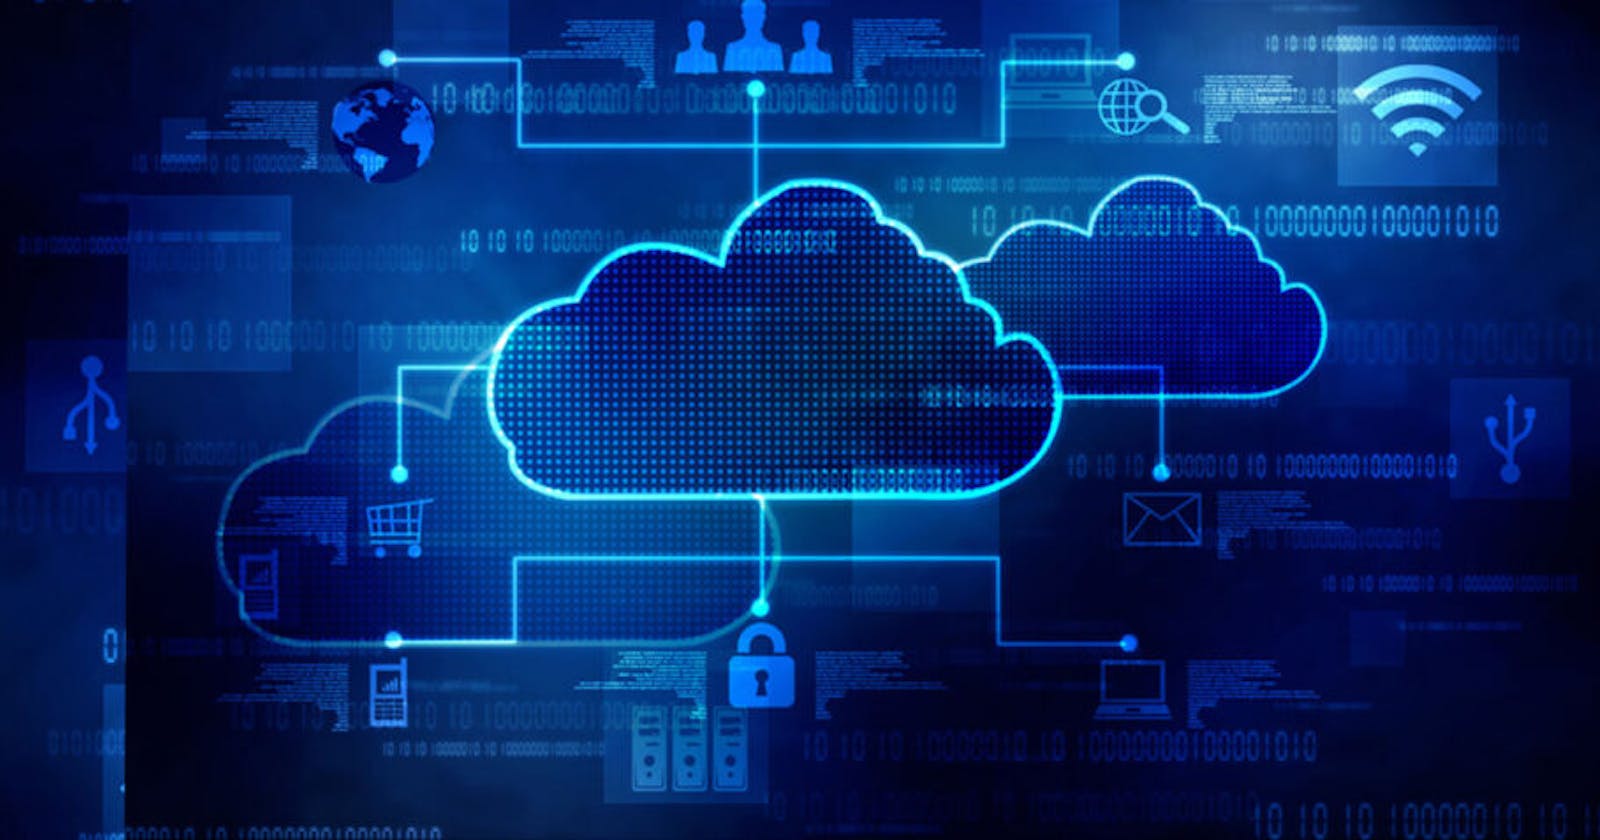 How Can We Improve Cloud Security?